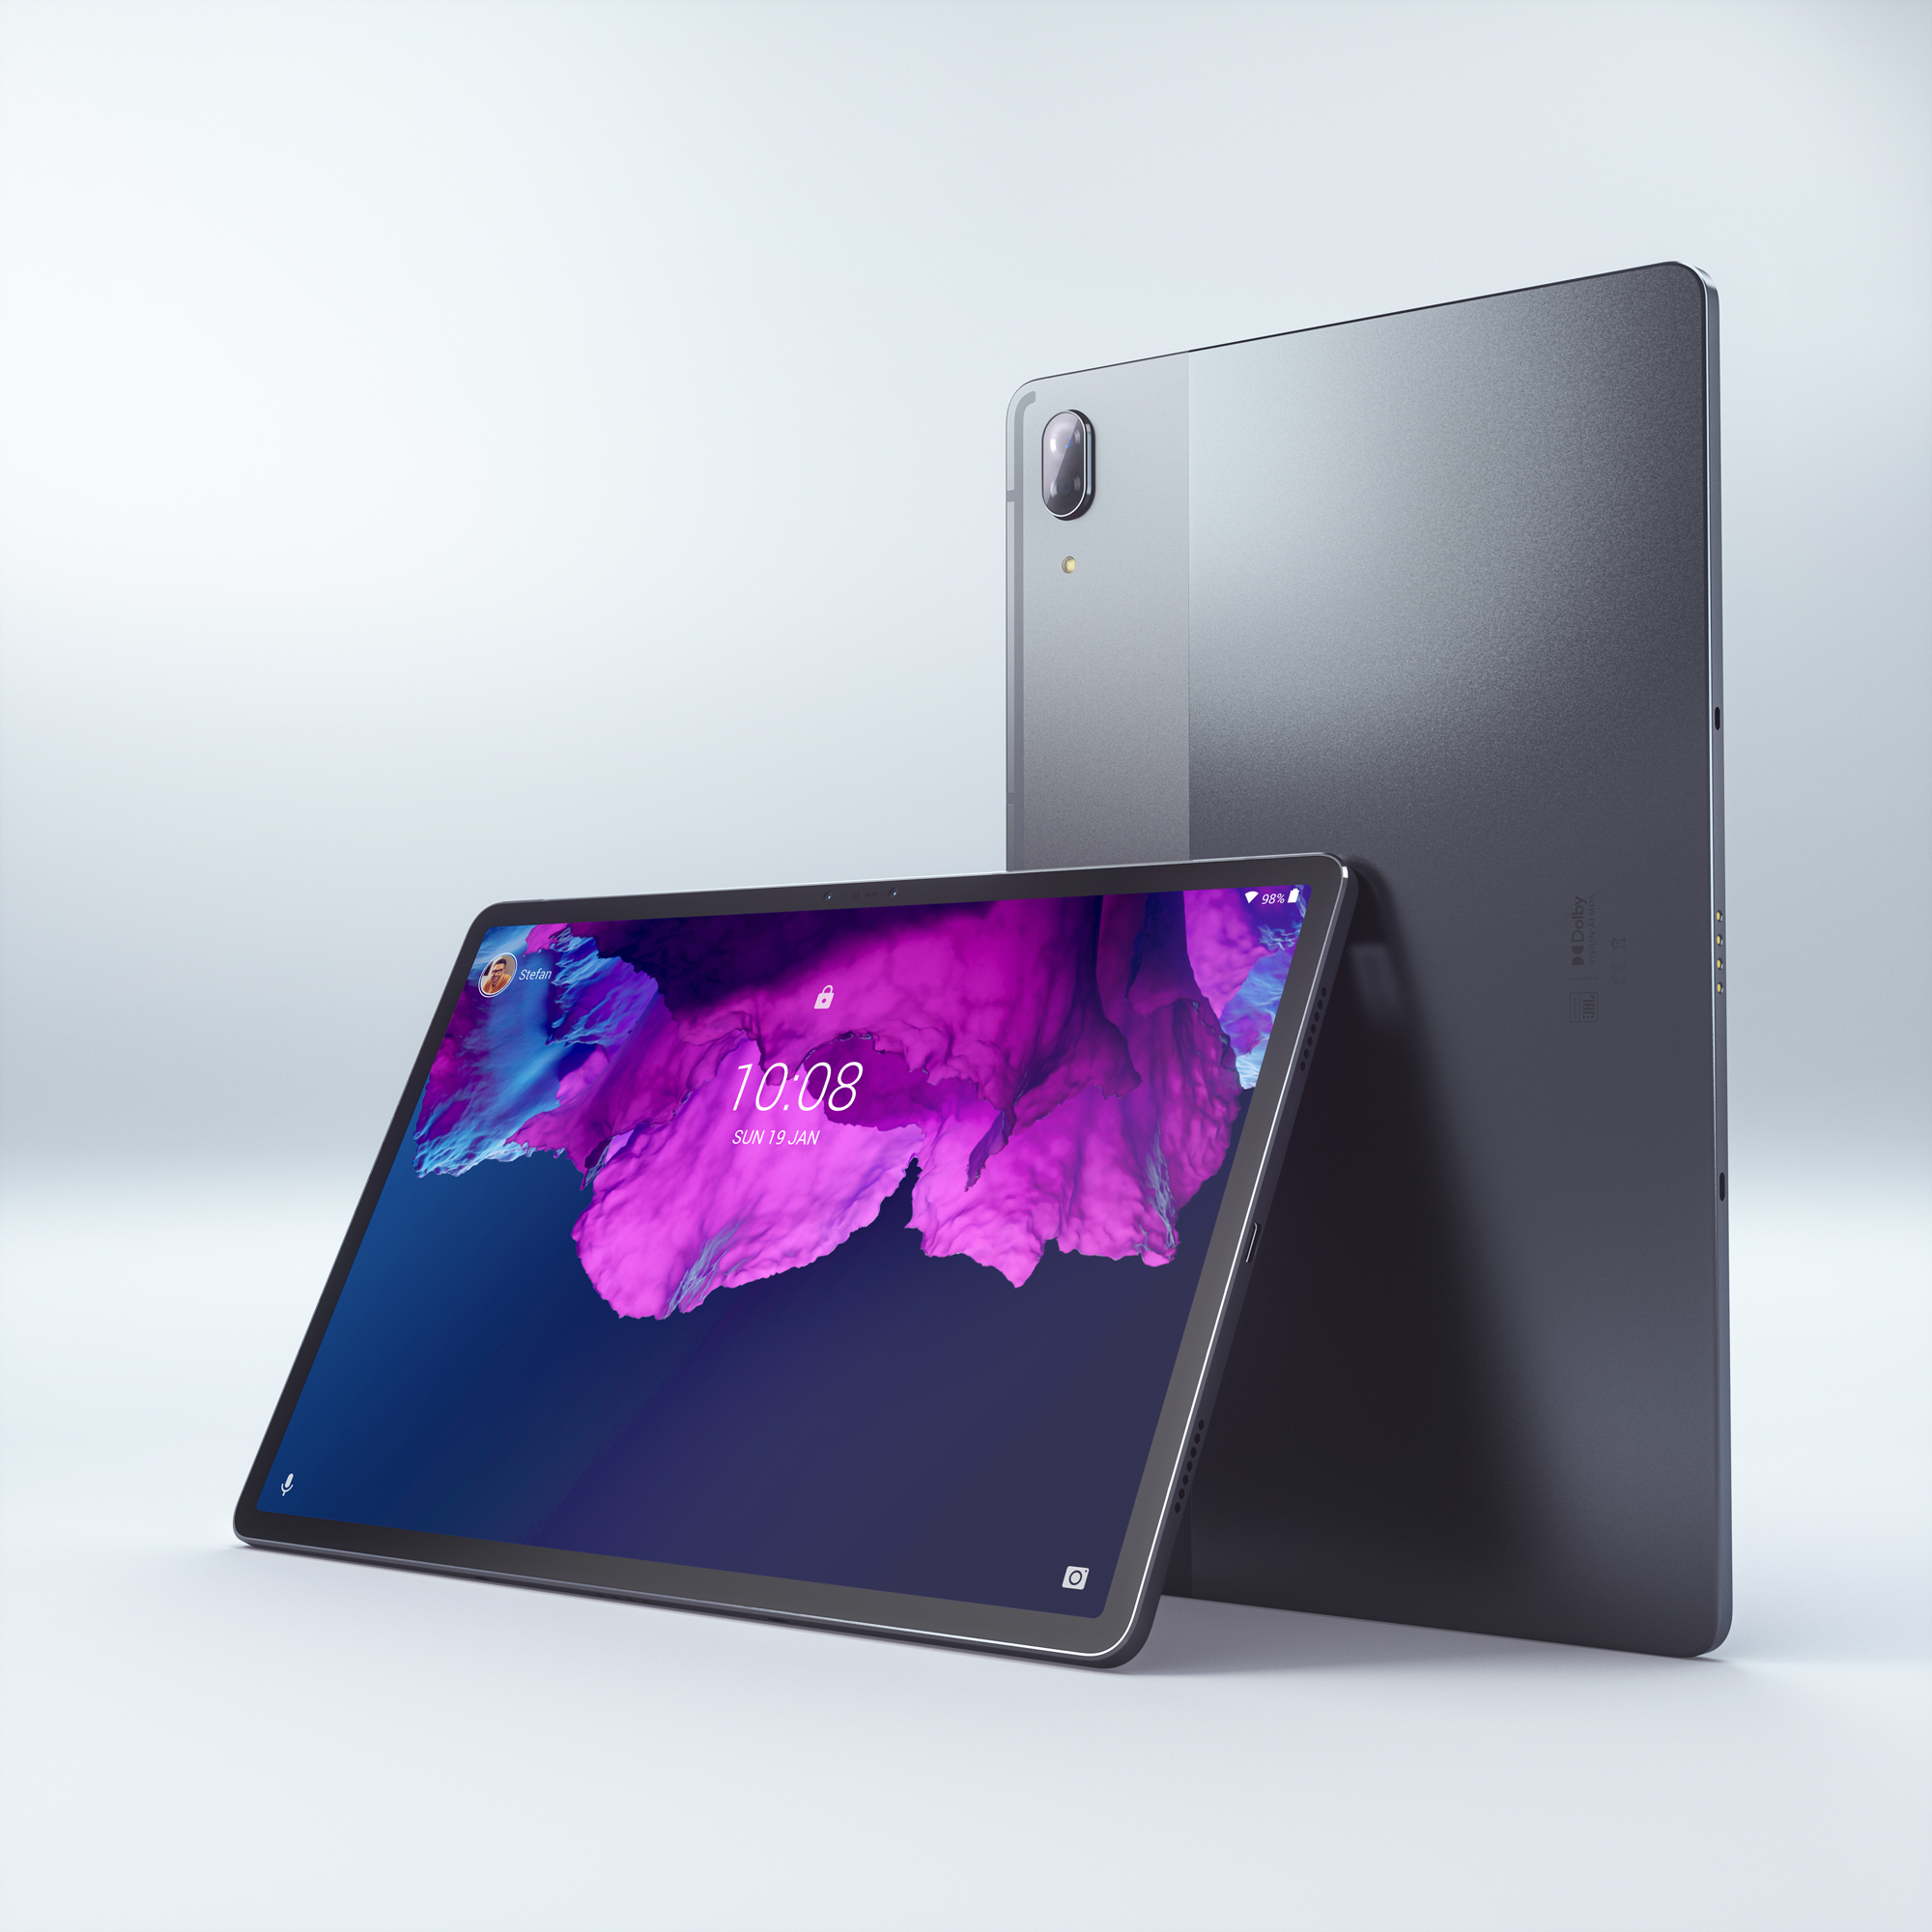 Lenovo P11 Pro tablet announced for 499 9to5Google